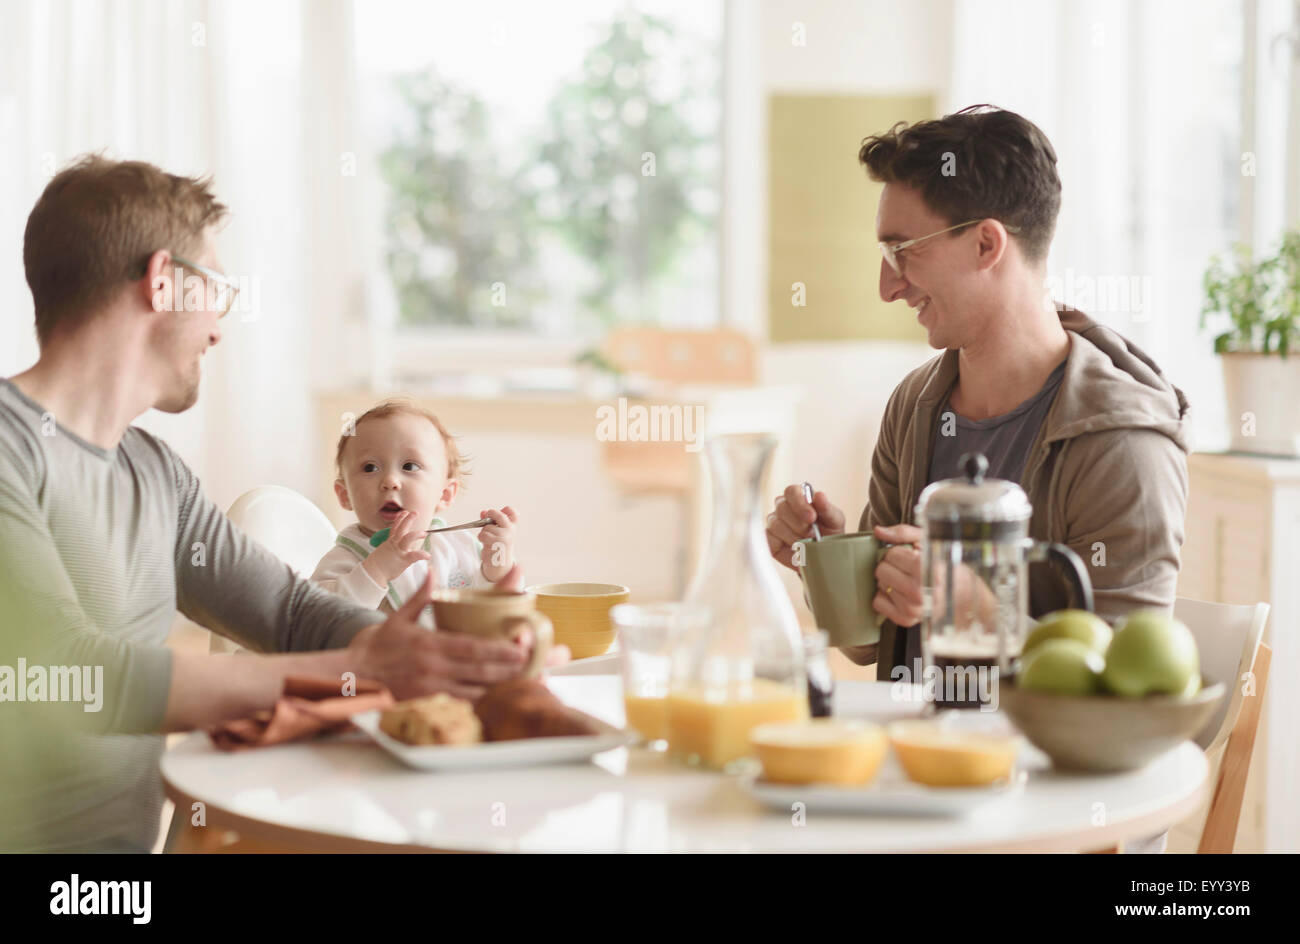 Caucasian gay fathers and baby eating breakfast Stock Photo